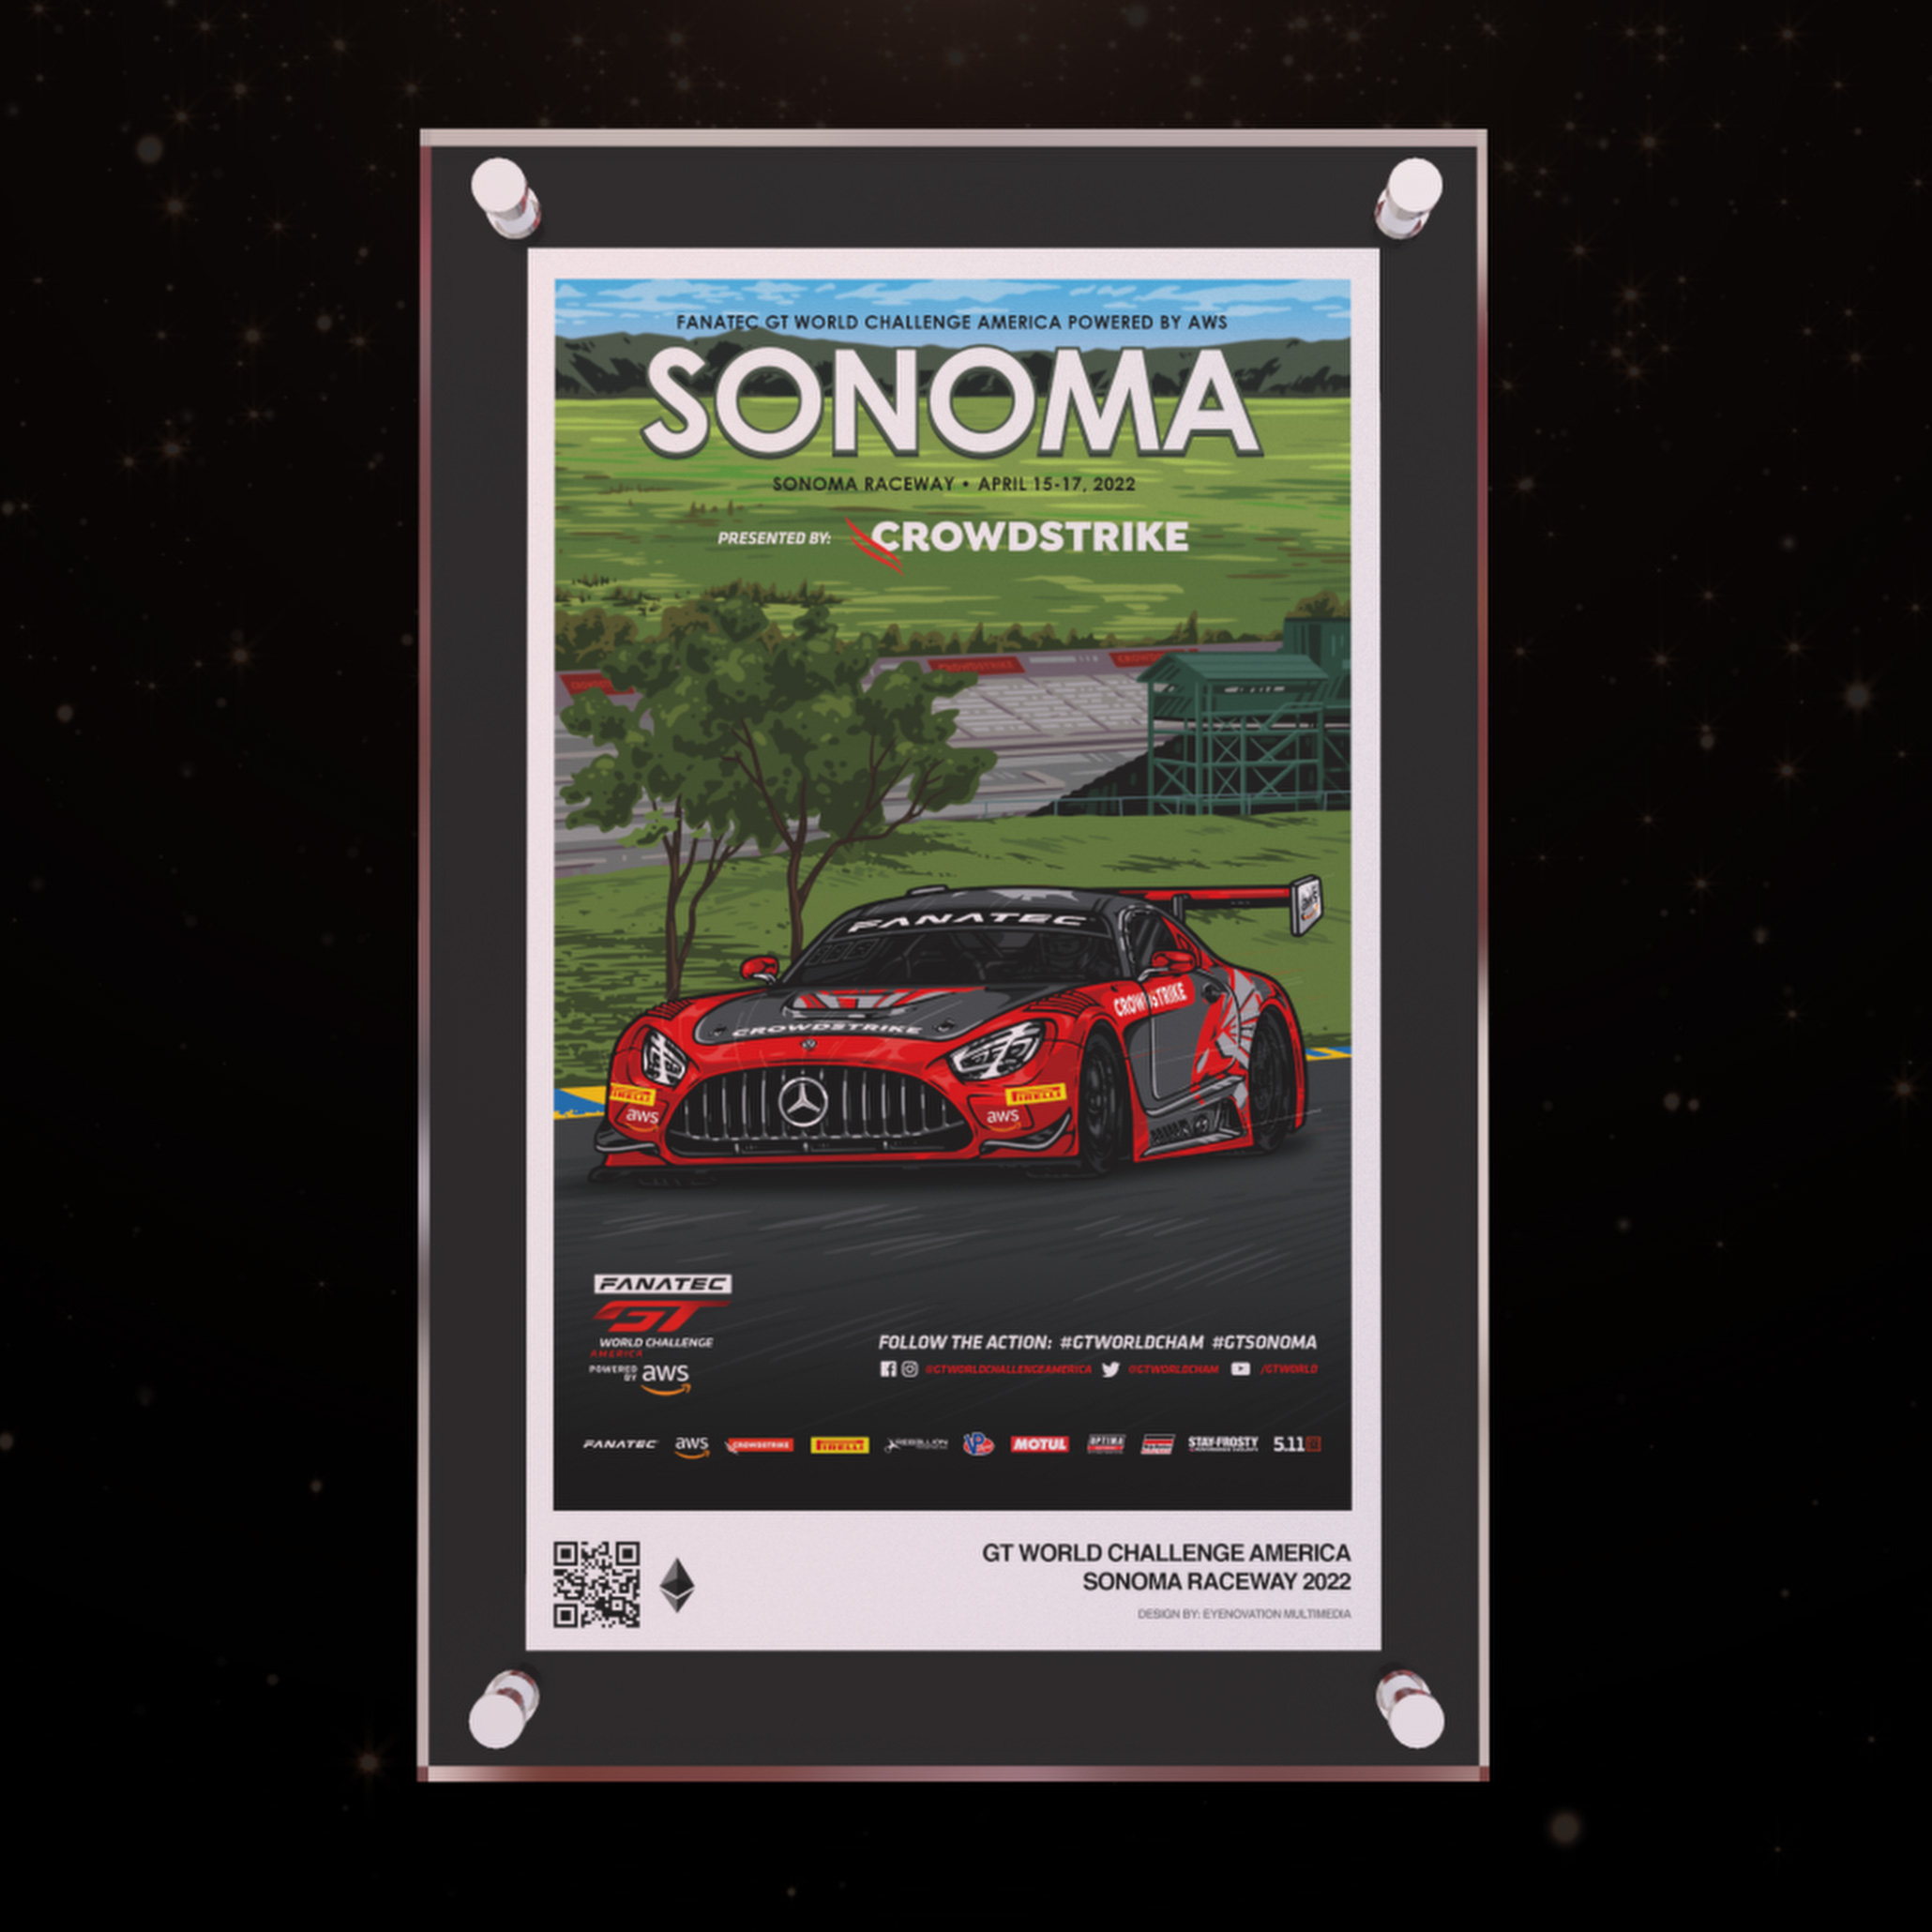 GT World Challenge America - G.P. of Sonoma 2022 Event Poster